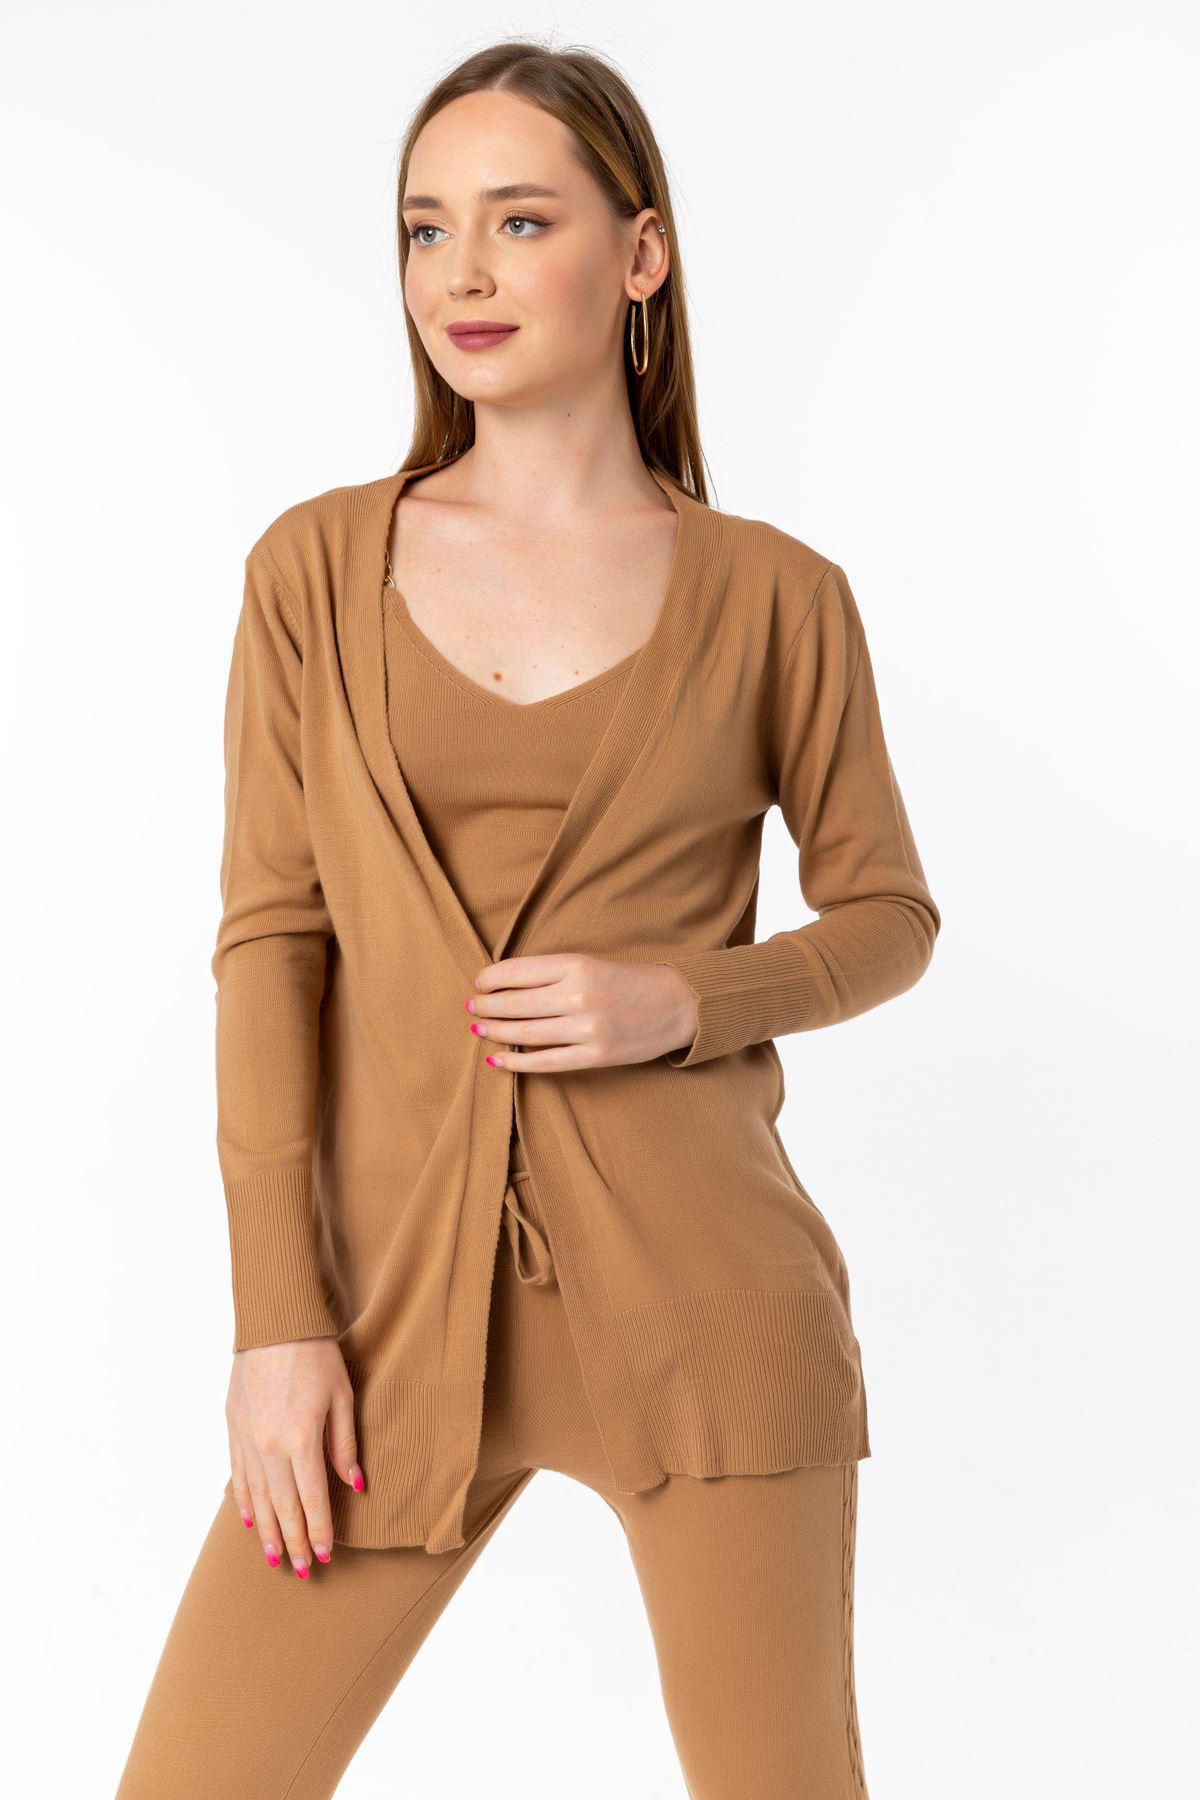 Knitwear Fabric Wide V Neck Long Full Fit Women'S Set 3 Pieces - Light Brown